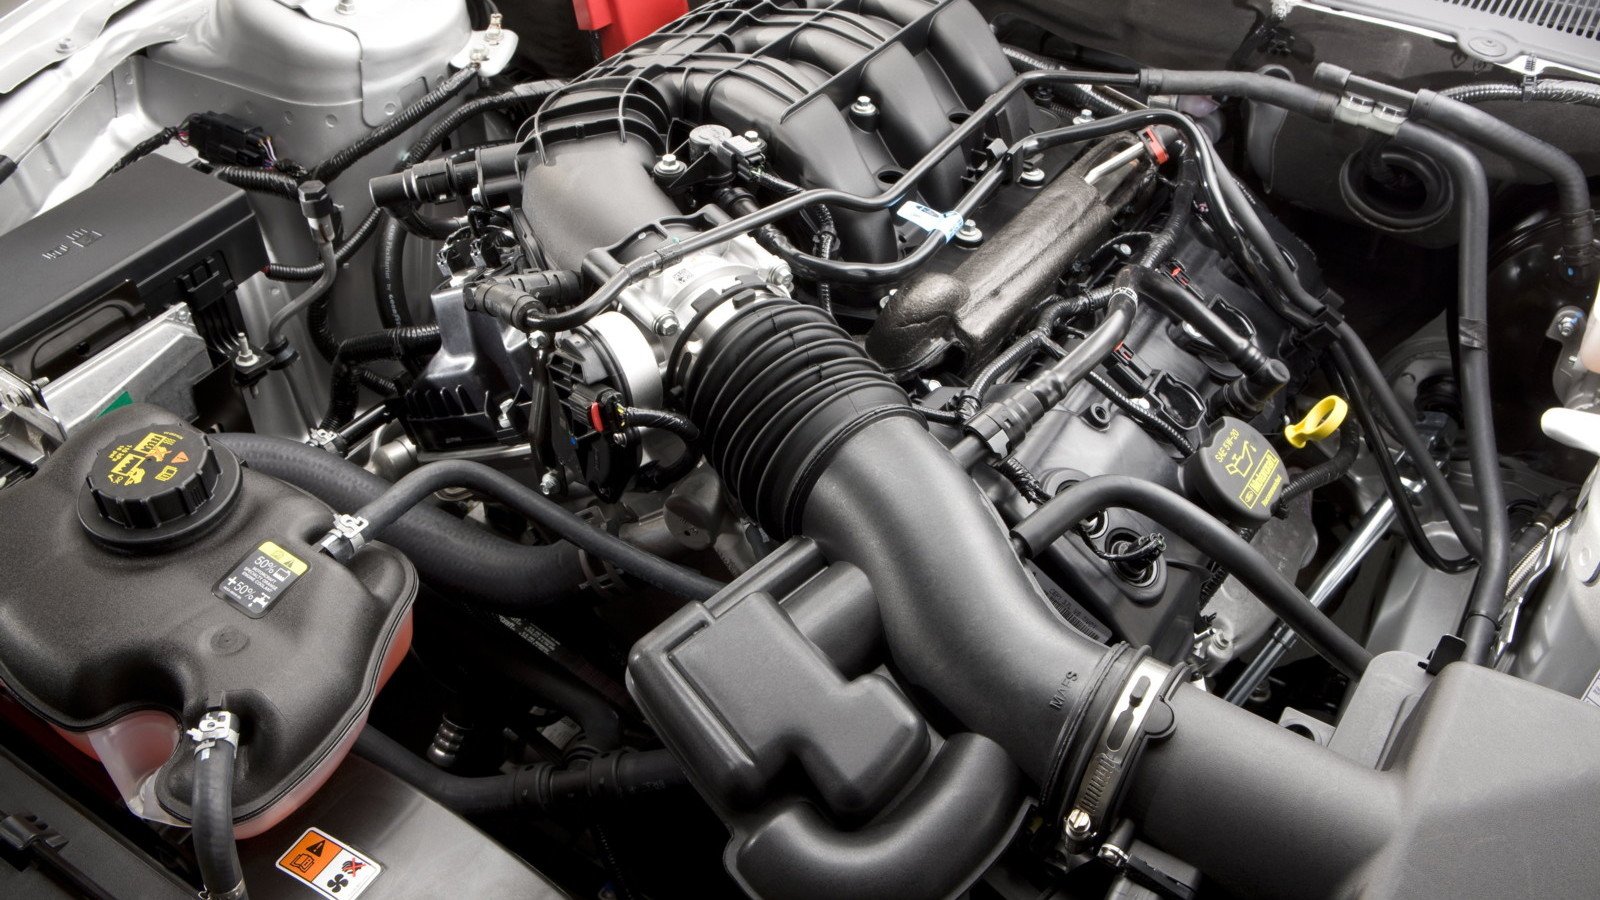 2011 Ford Mustang V-6 - new Duratec 3.7-liter